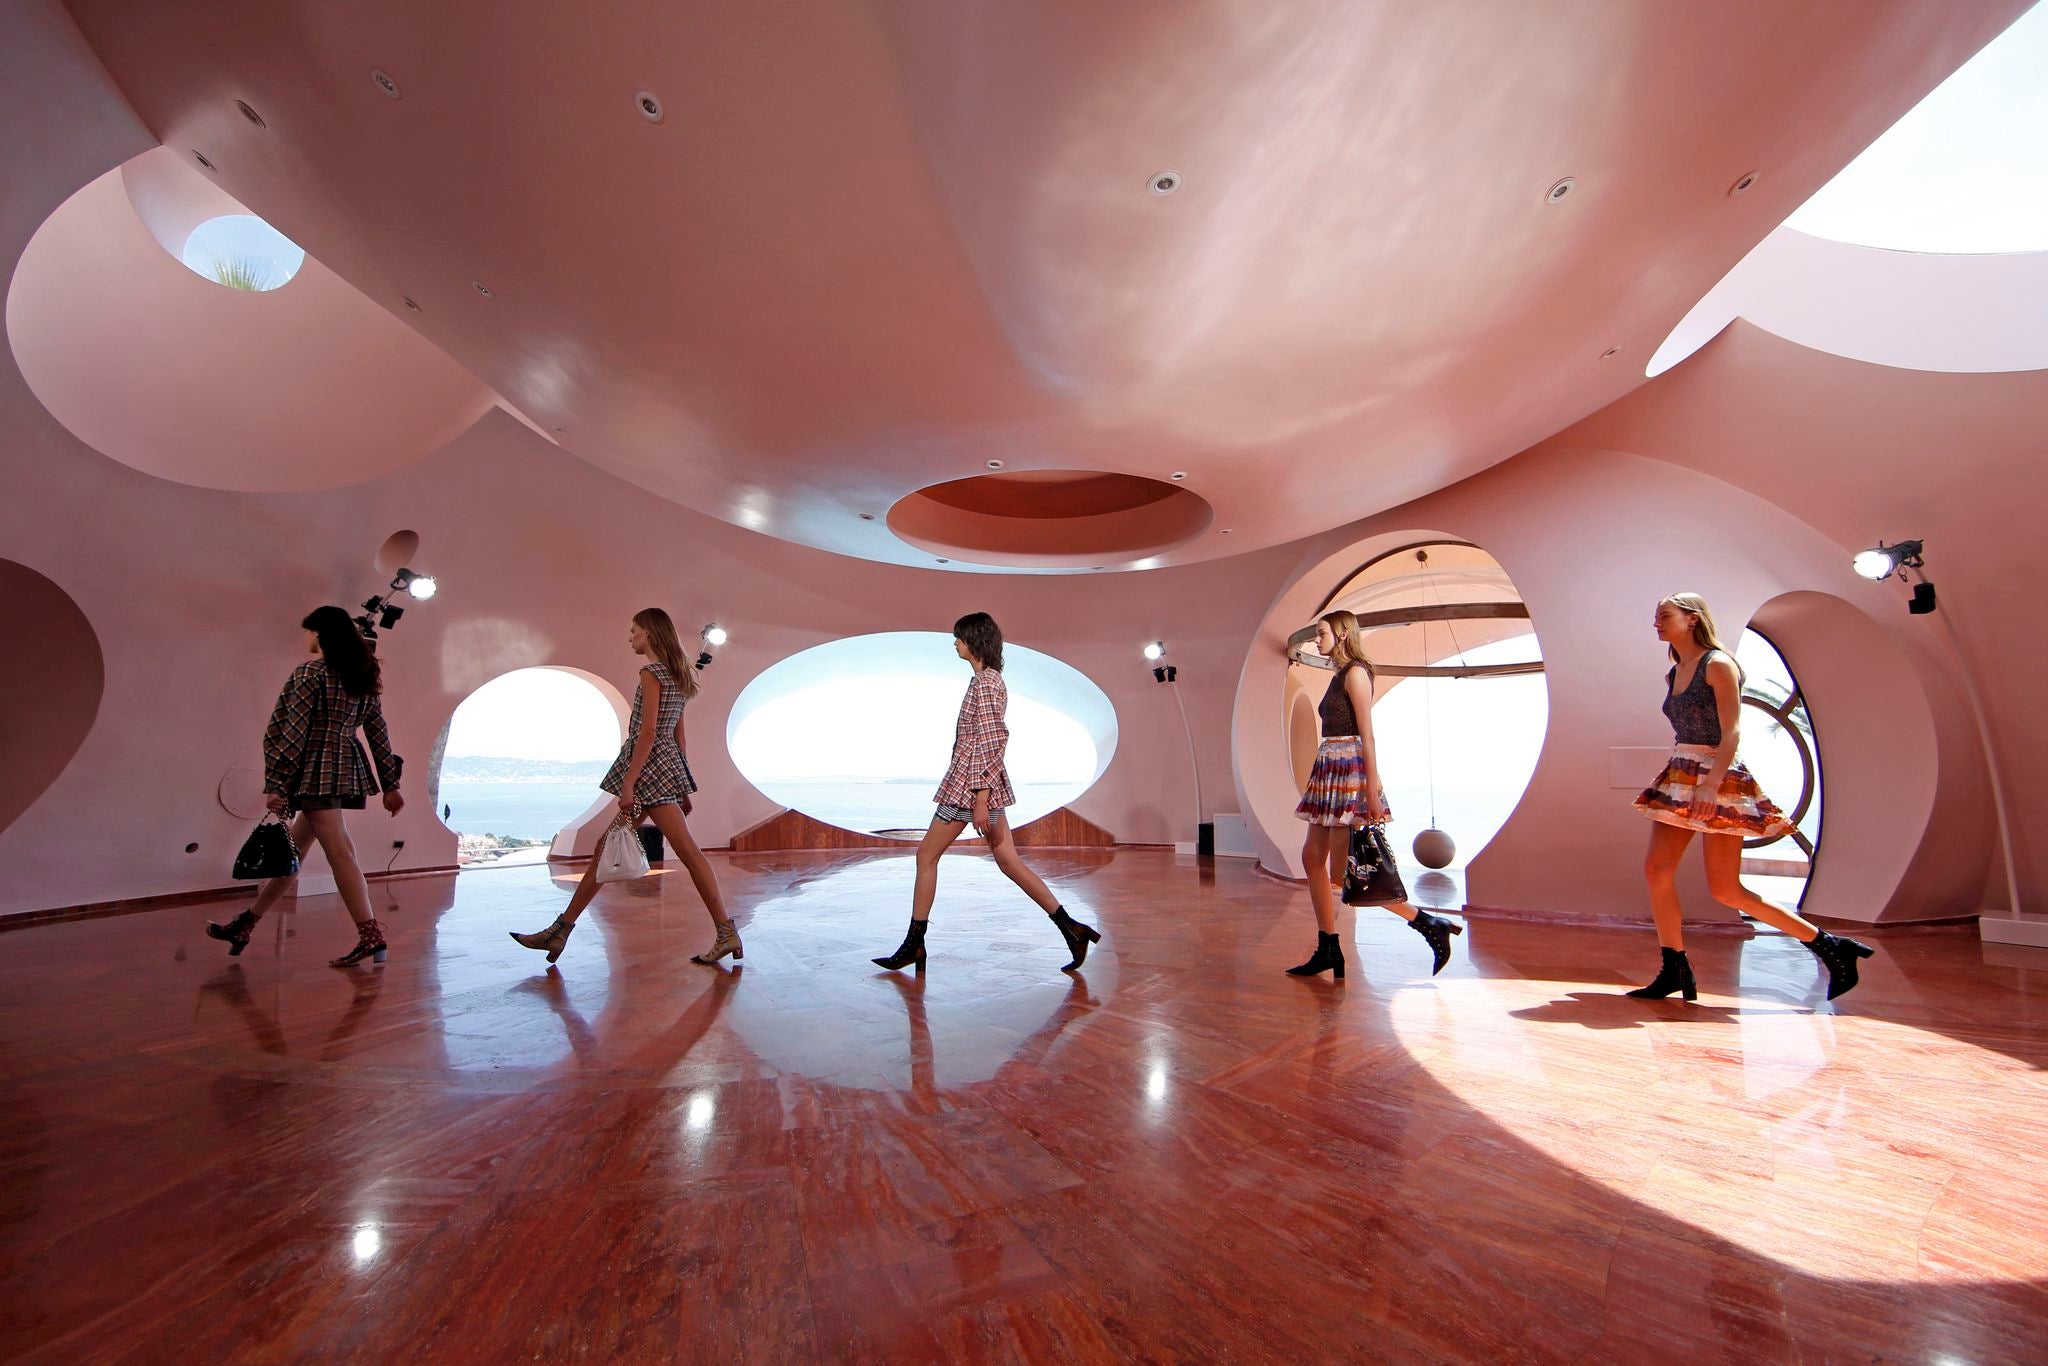 Creations by Raf Simons for Dior’s Cruise 2016 collection at the Palais Bulles near Cannes